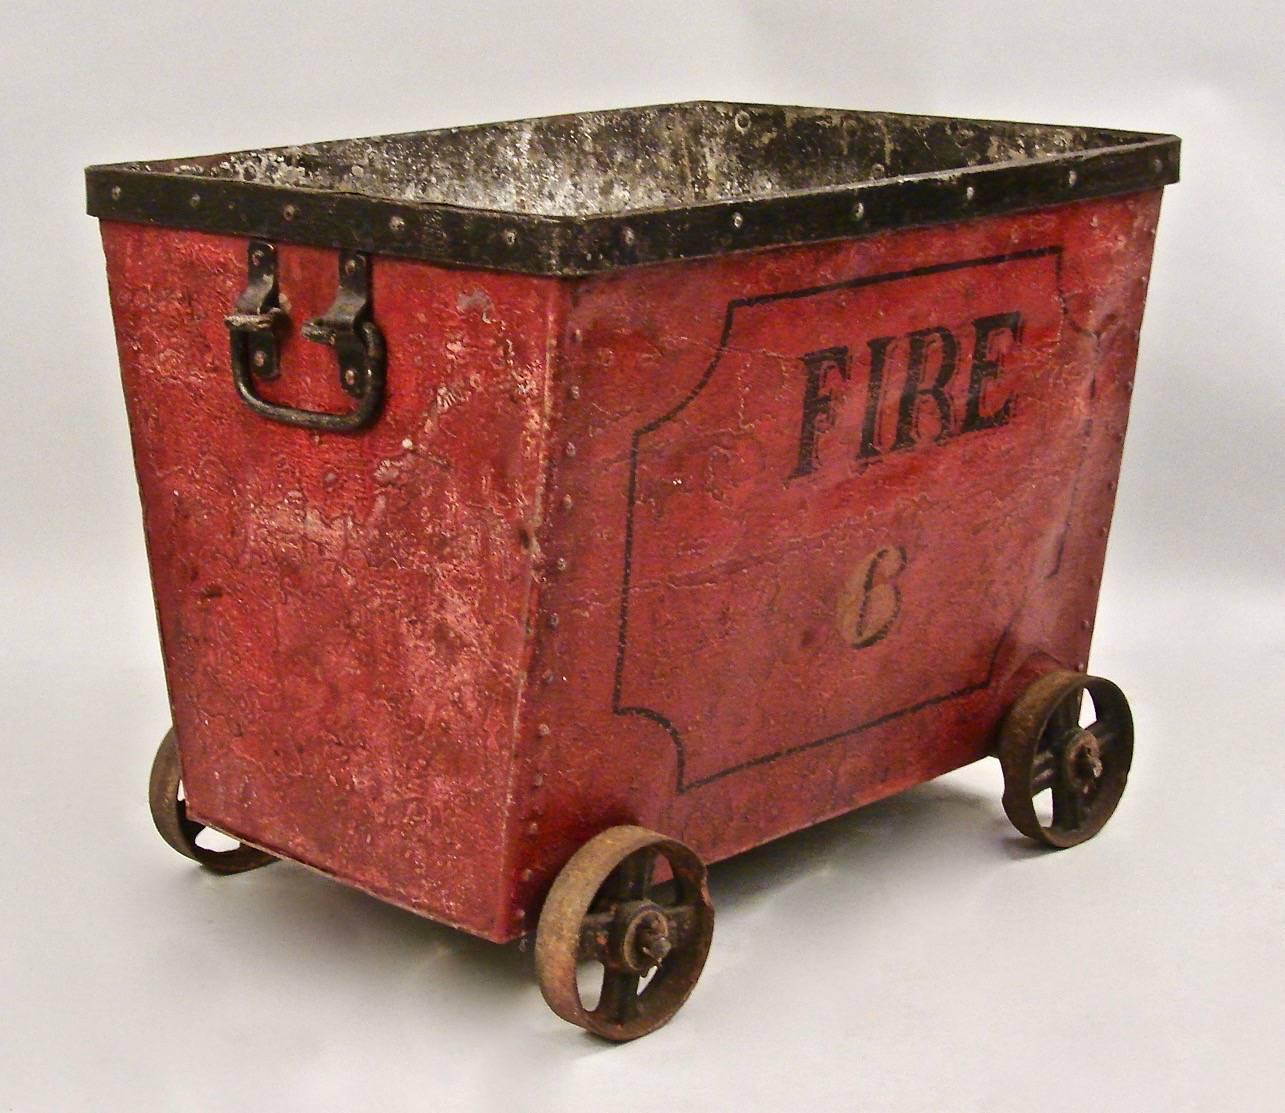 An unusual painted metal cart with rivet construction, the top with a black applied edge, the front stencilled fire six, supported on metal spoked wheels with carry handles on the sides. Wonderful old surface and paint. This may have been used by